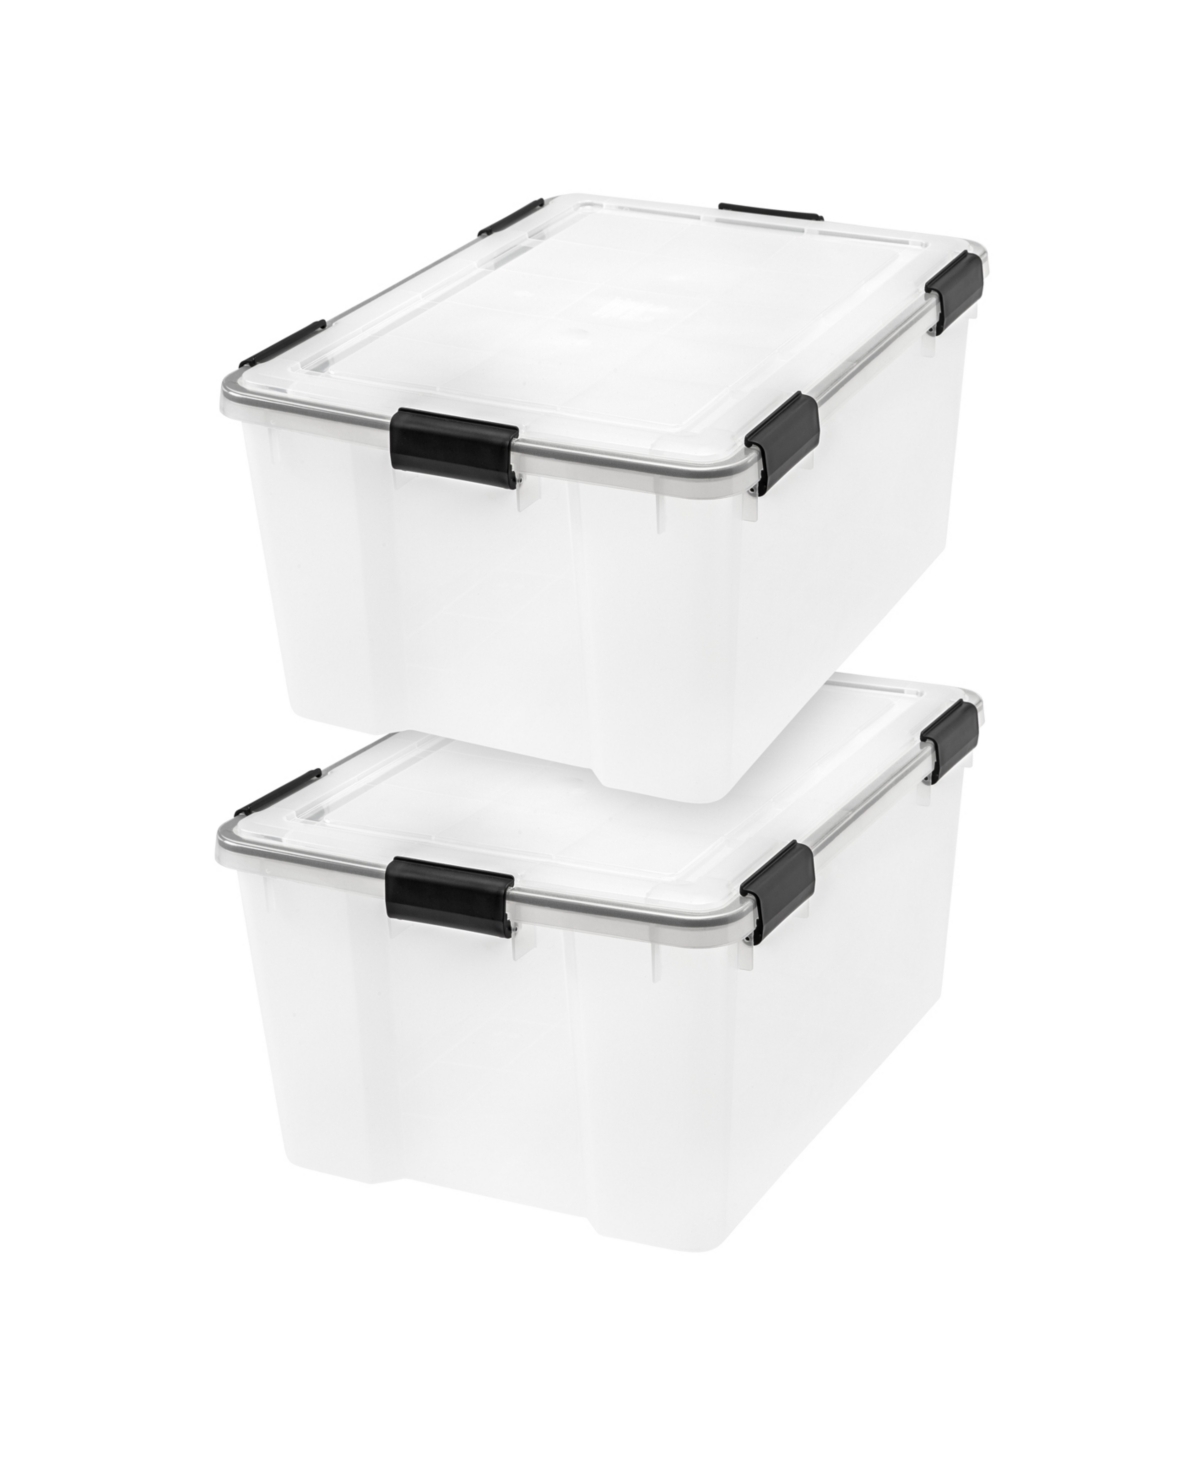 63 Qt Storage Box with Gasket Seal Lid, 2 Pack - Bpa-Free, Made in Usa - Heavy Duty Moving Containers with Tight Latch, Weather Proof Tote Bi